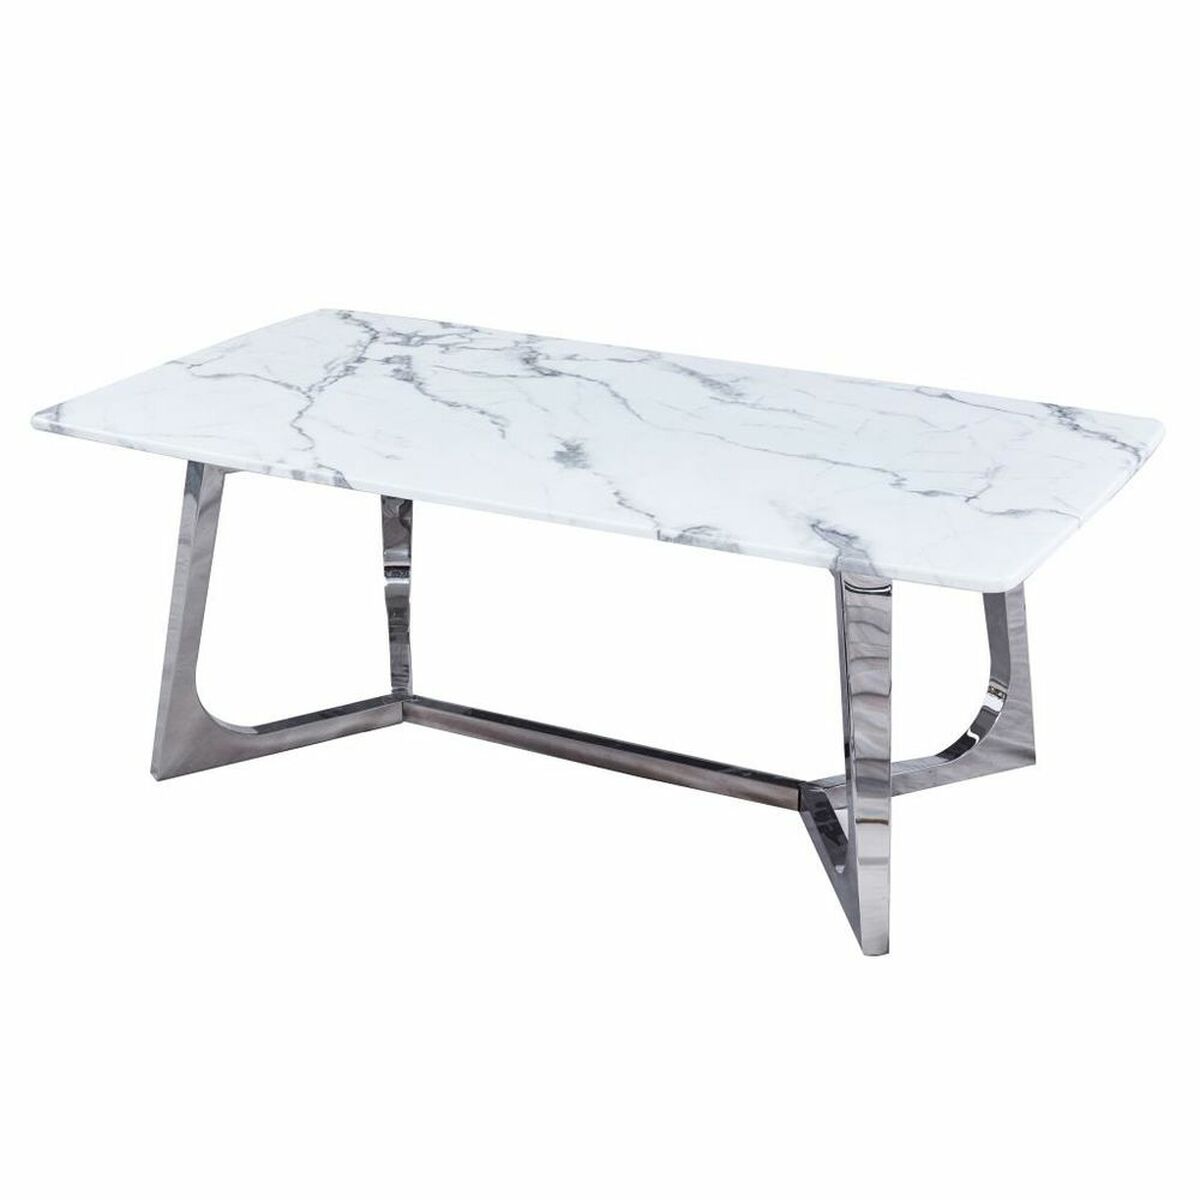 Side table DKD Home Decor Marble Steel (127 x 70 x 43 cm)